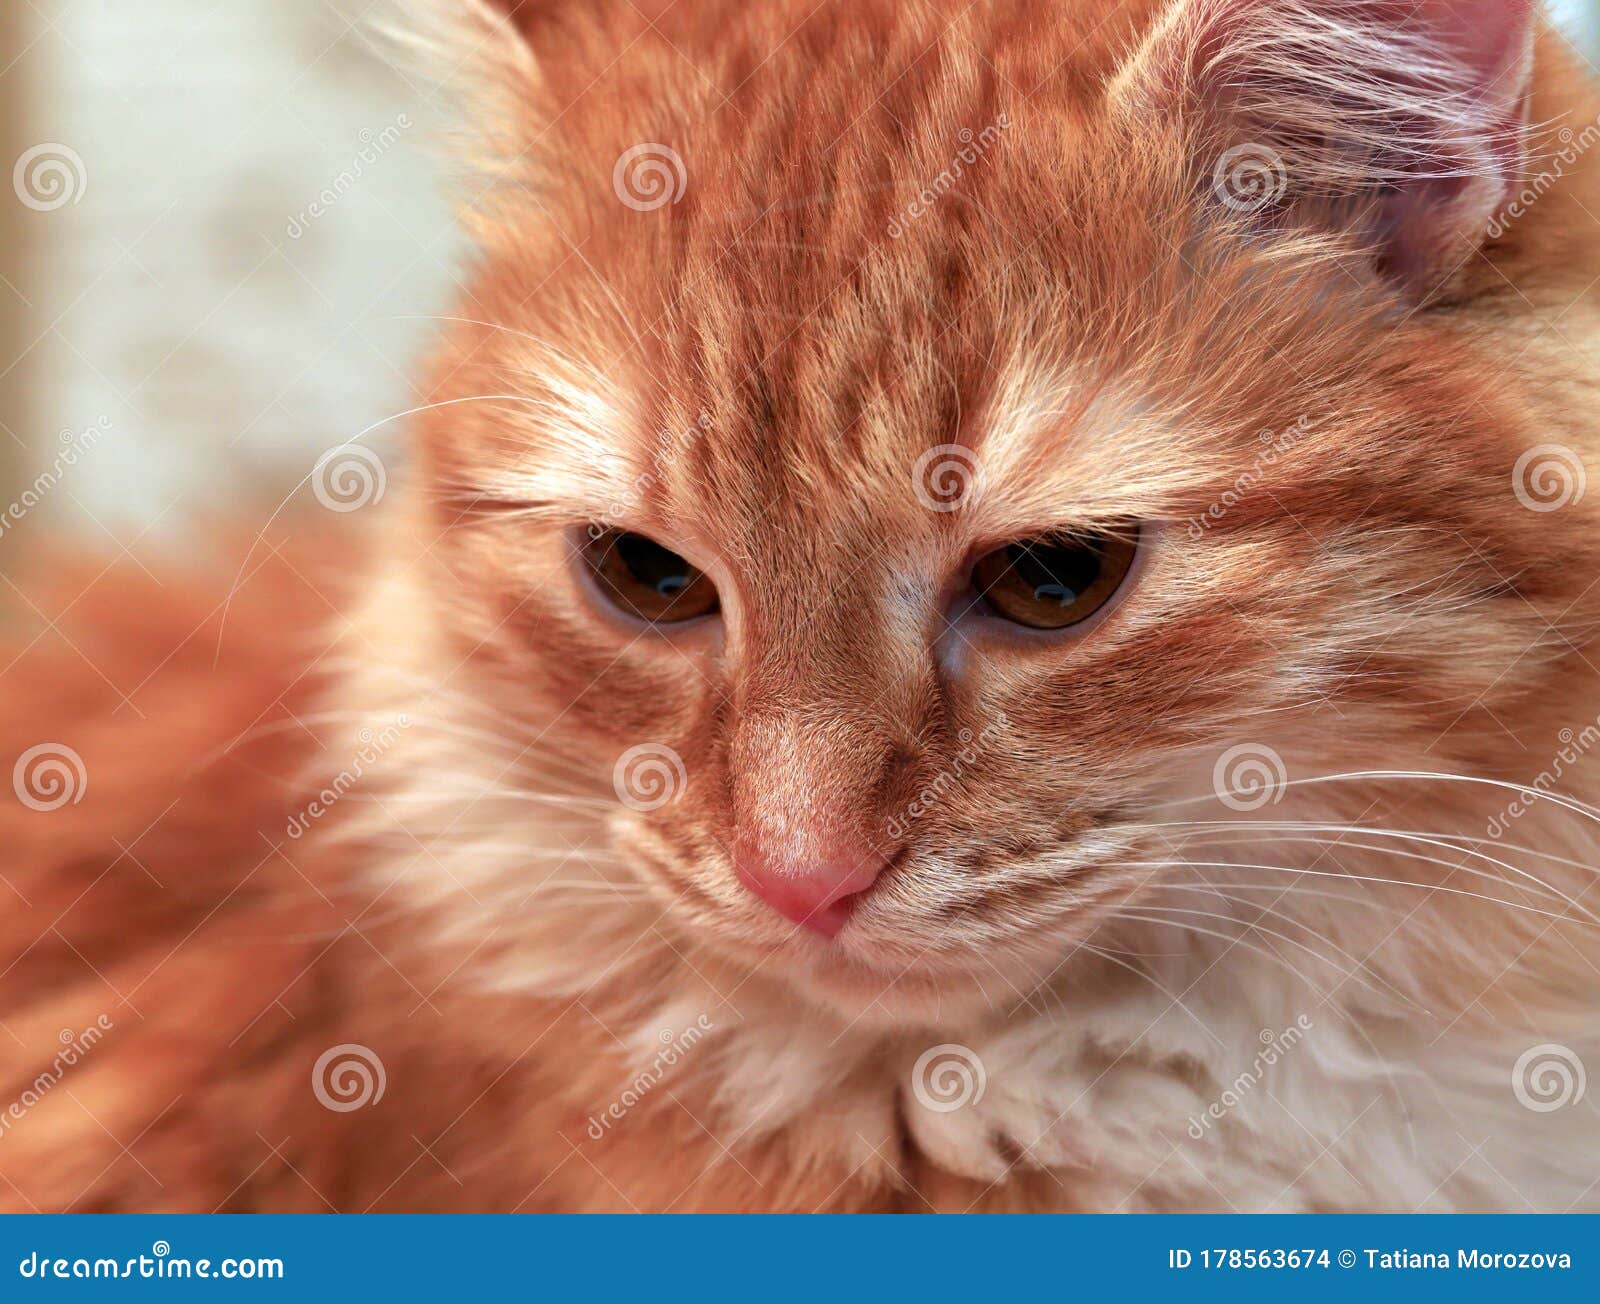 Portrait Of A Young Red-haired Cats Stock Photo - Image of kitten, cute